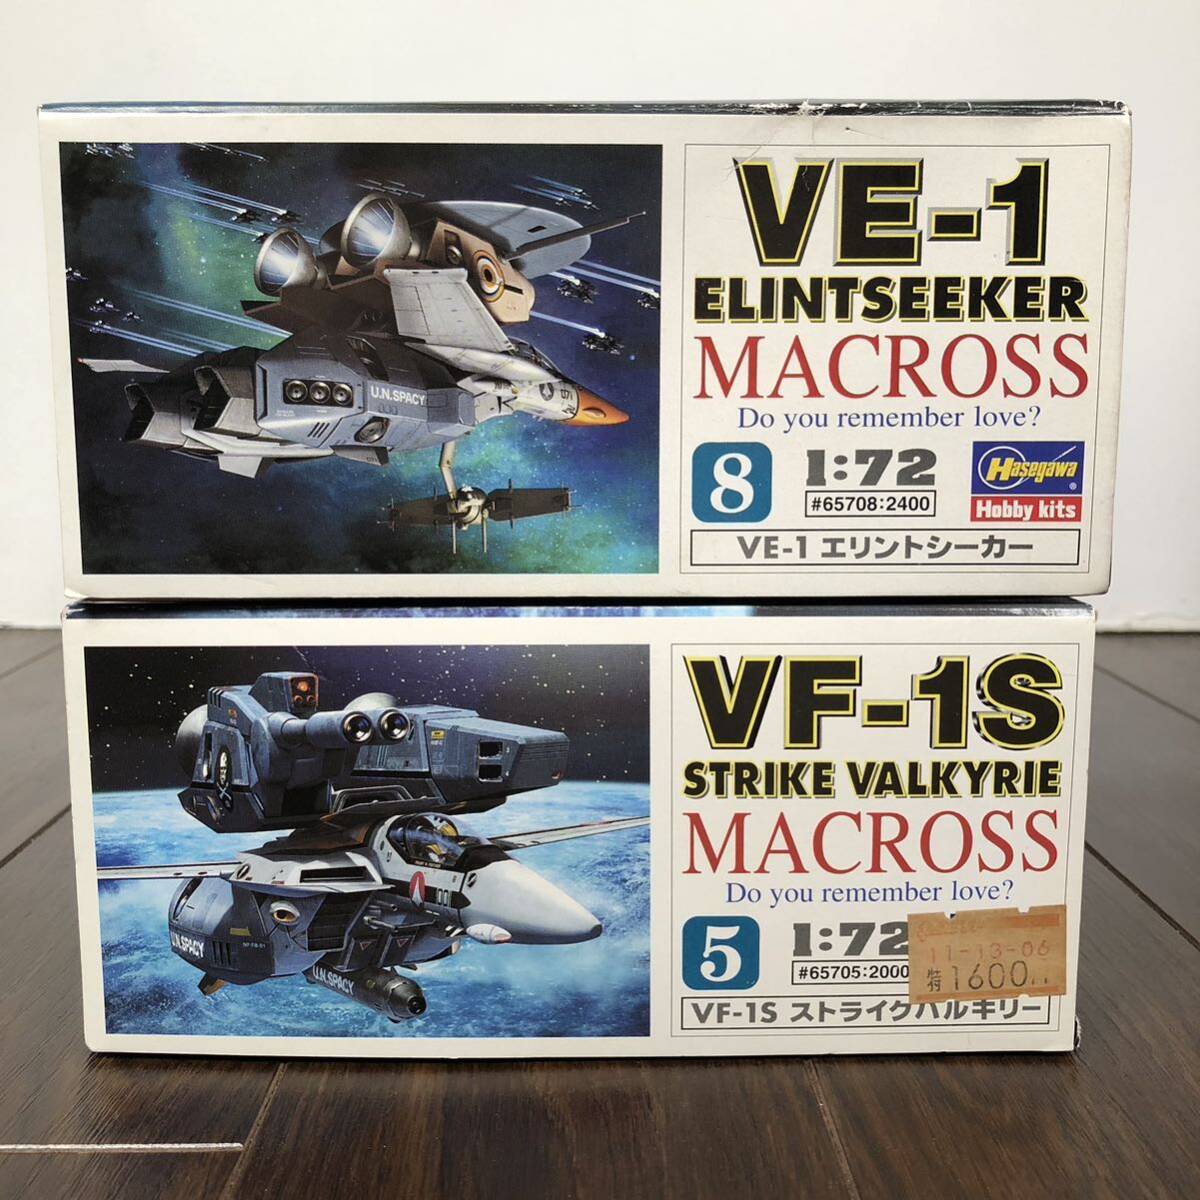  Super Dimension Fortress Macross love *.... - .1/72 VE-1 Erin to seeker /VF-1S Strike bar drill - not yet constructed Hasegawa plastic model 